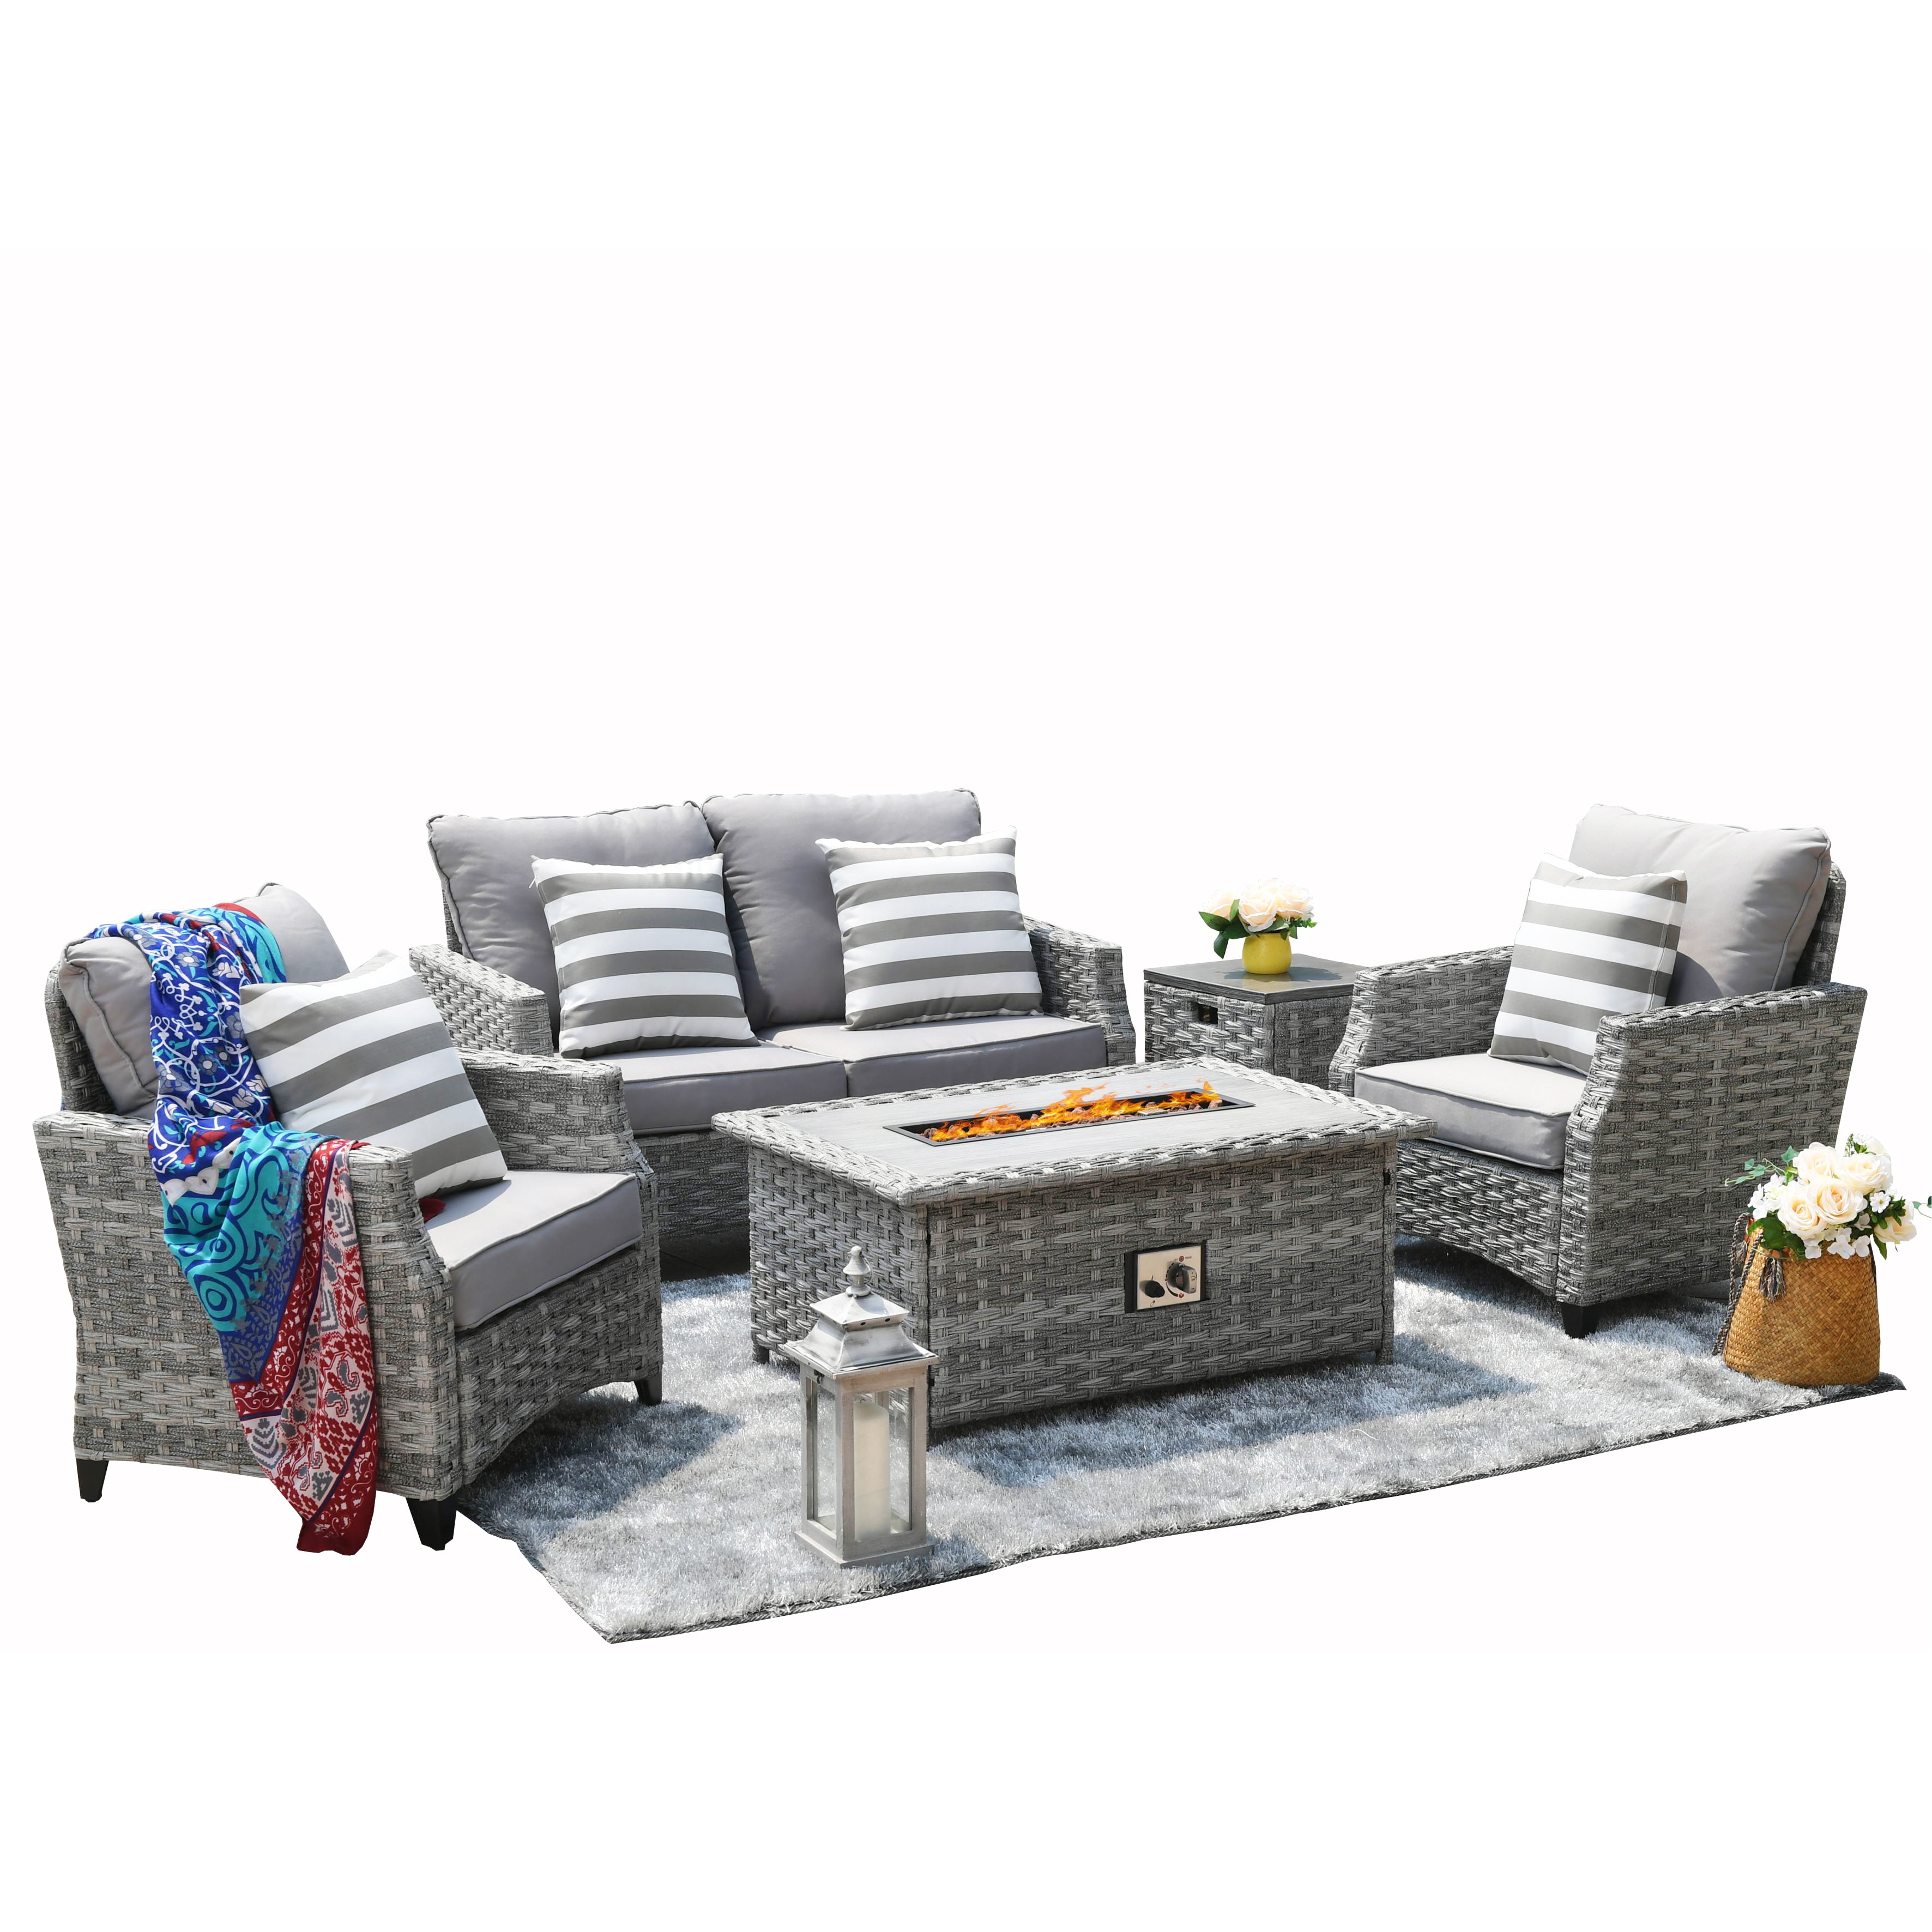 Amora 5-piece Gas Fire Sofa Seating Group with Cushions